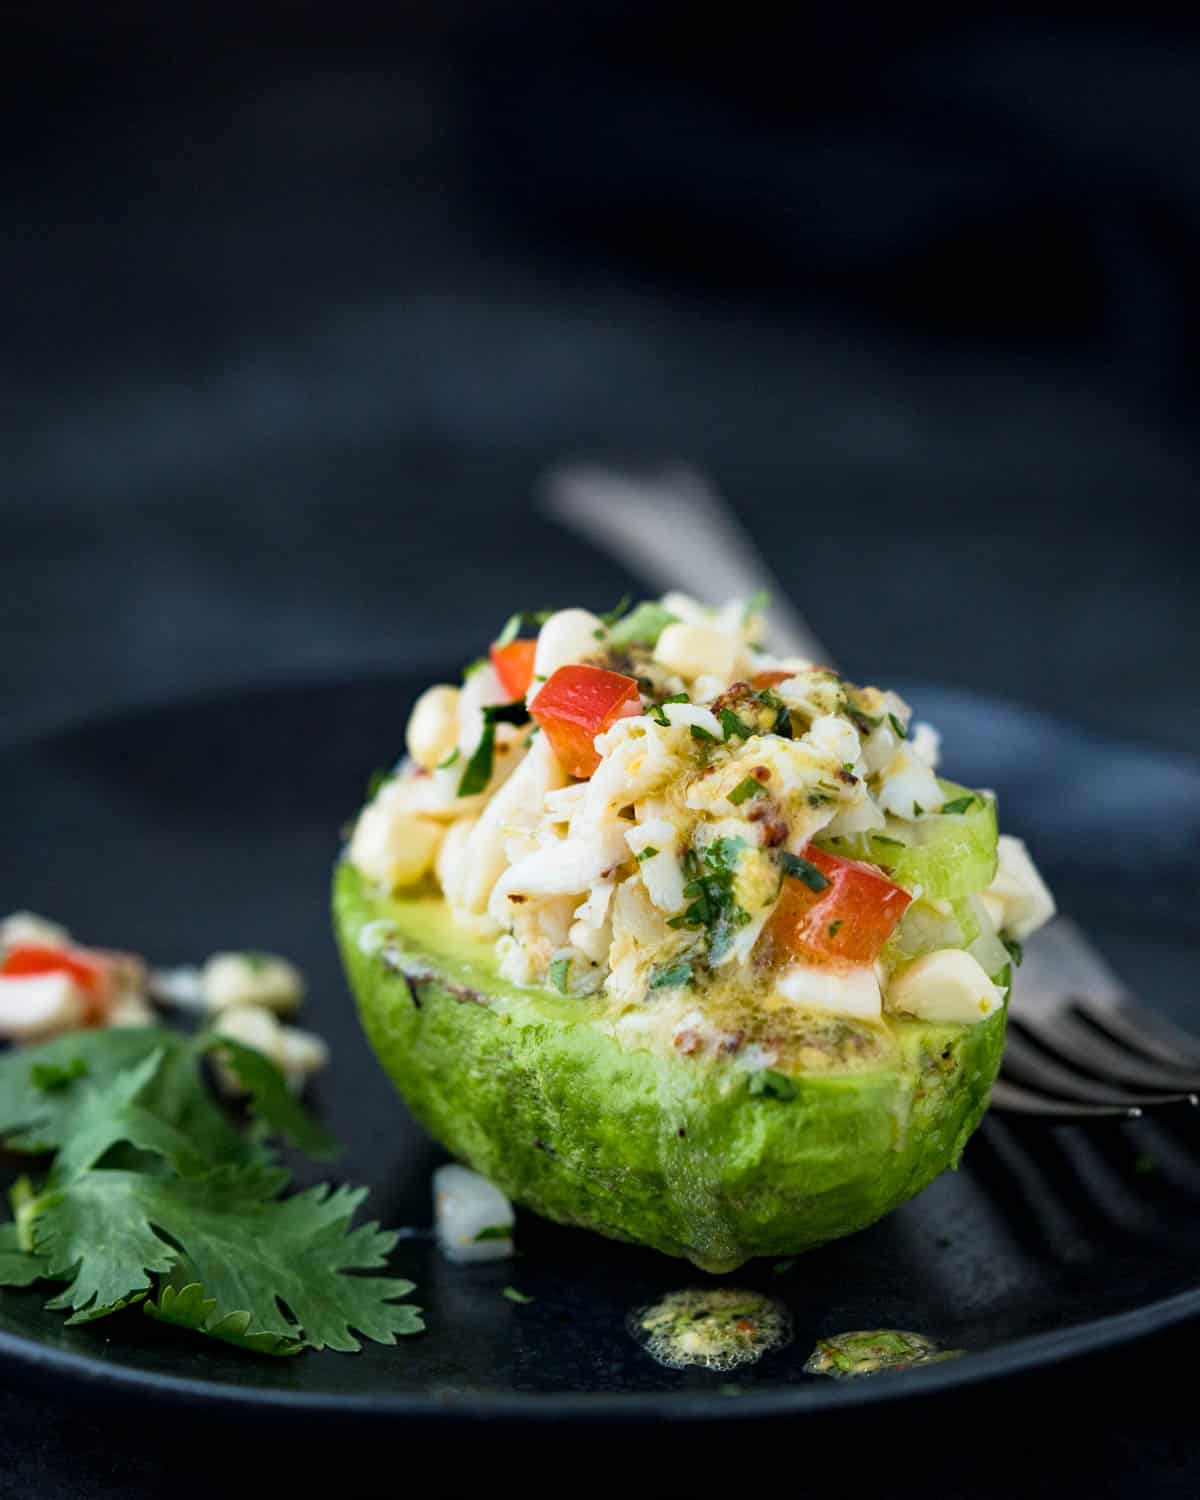 Half of an avocado filled with corn and crab salad.